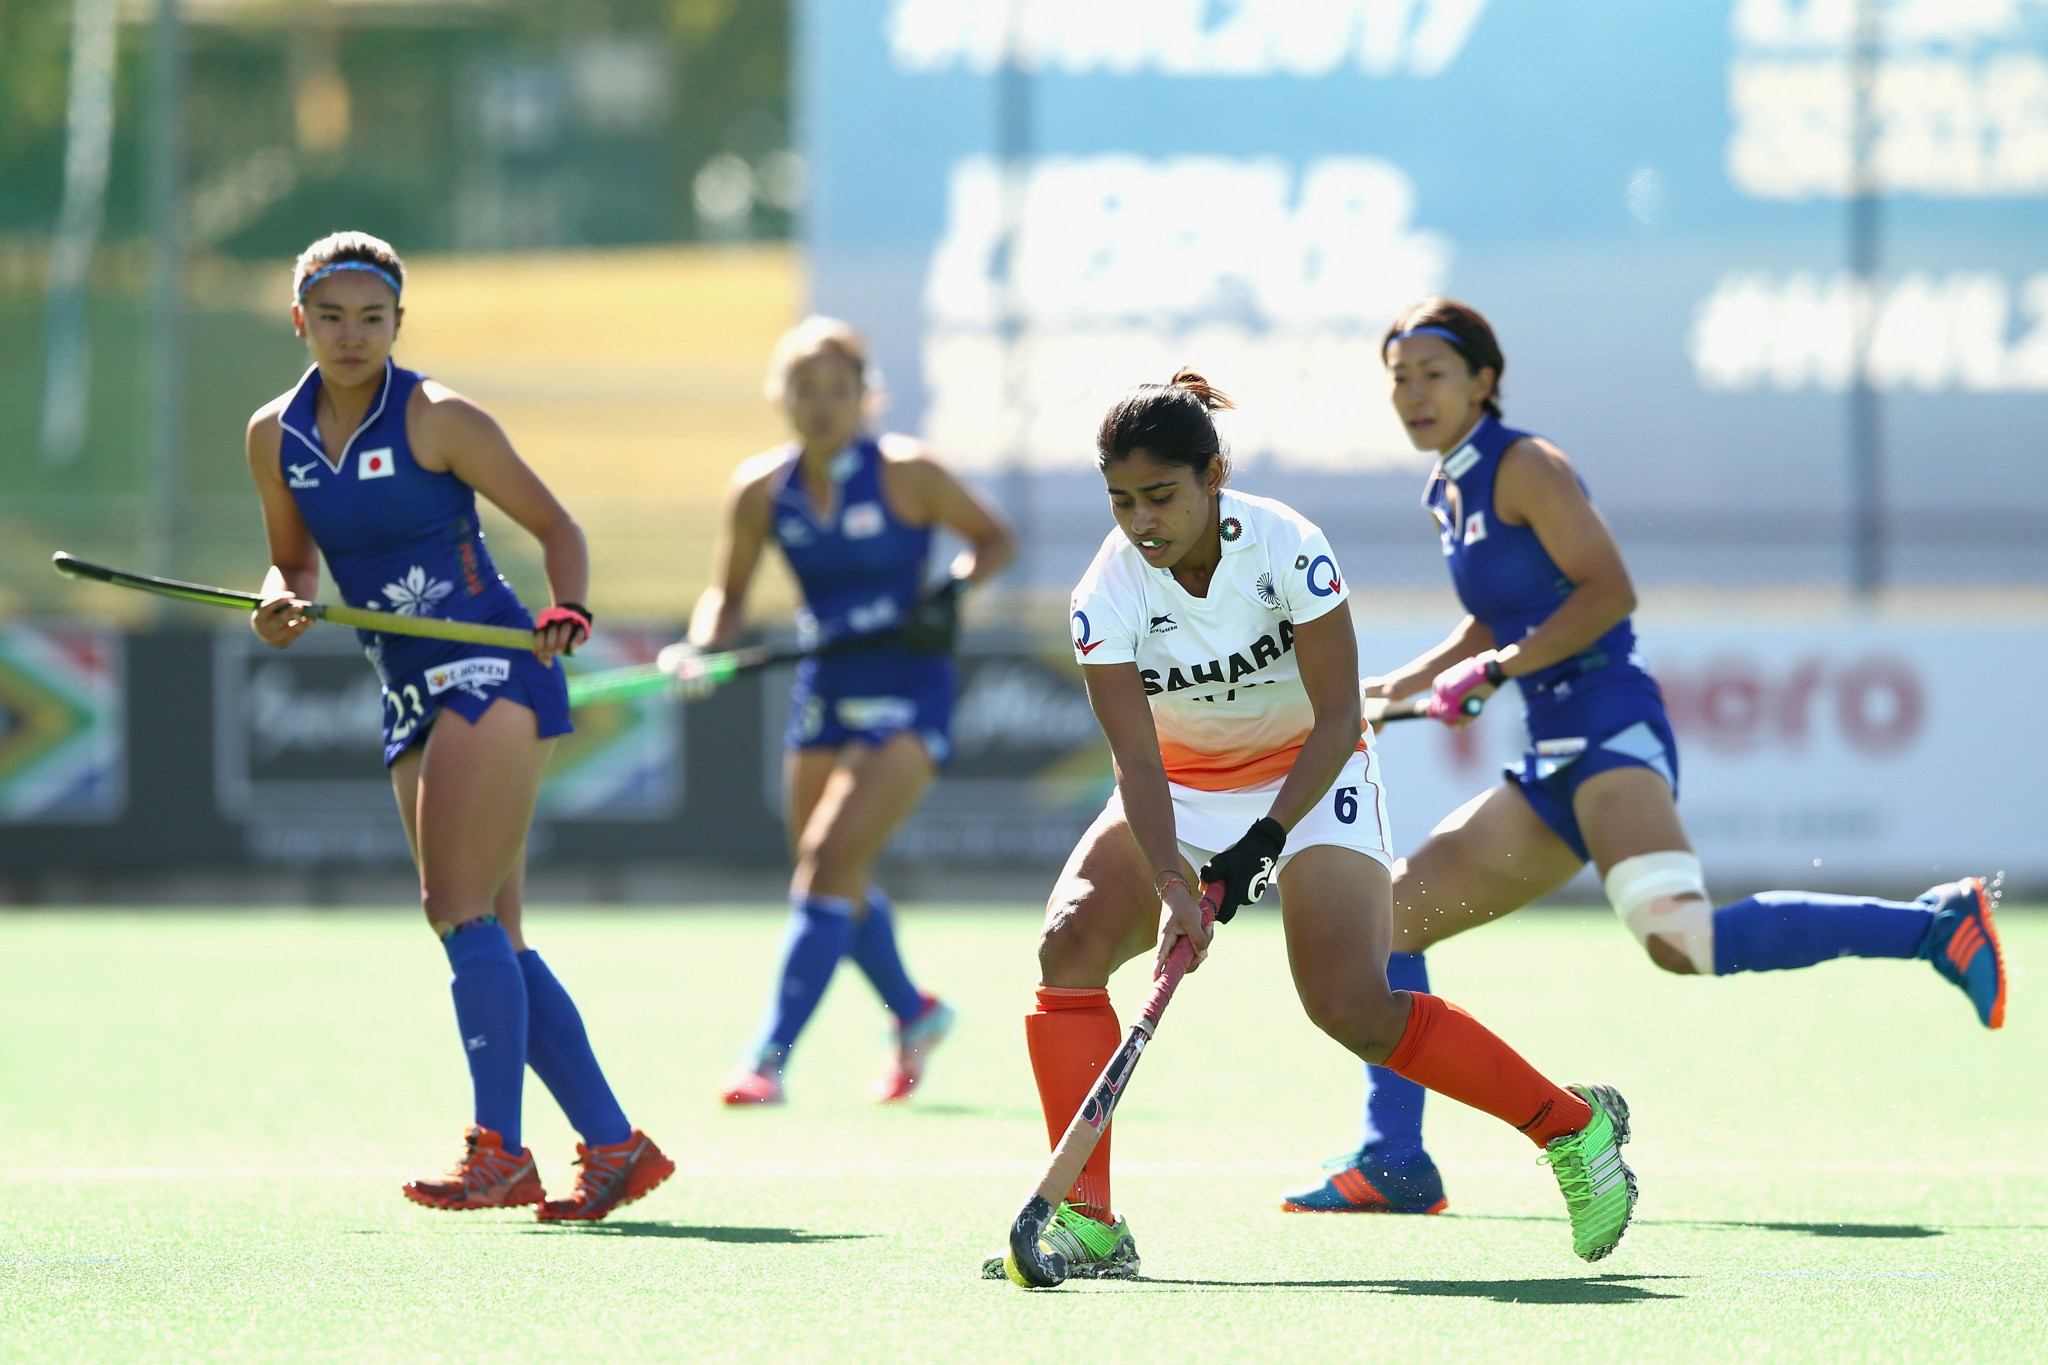 India name women's hockey team for Gold Coast 2018 Commonwealth Games